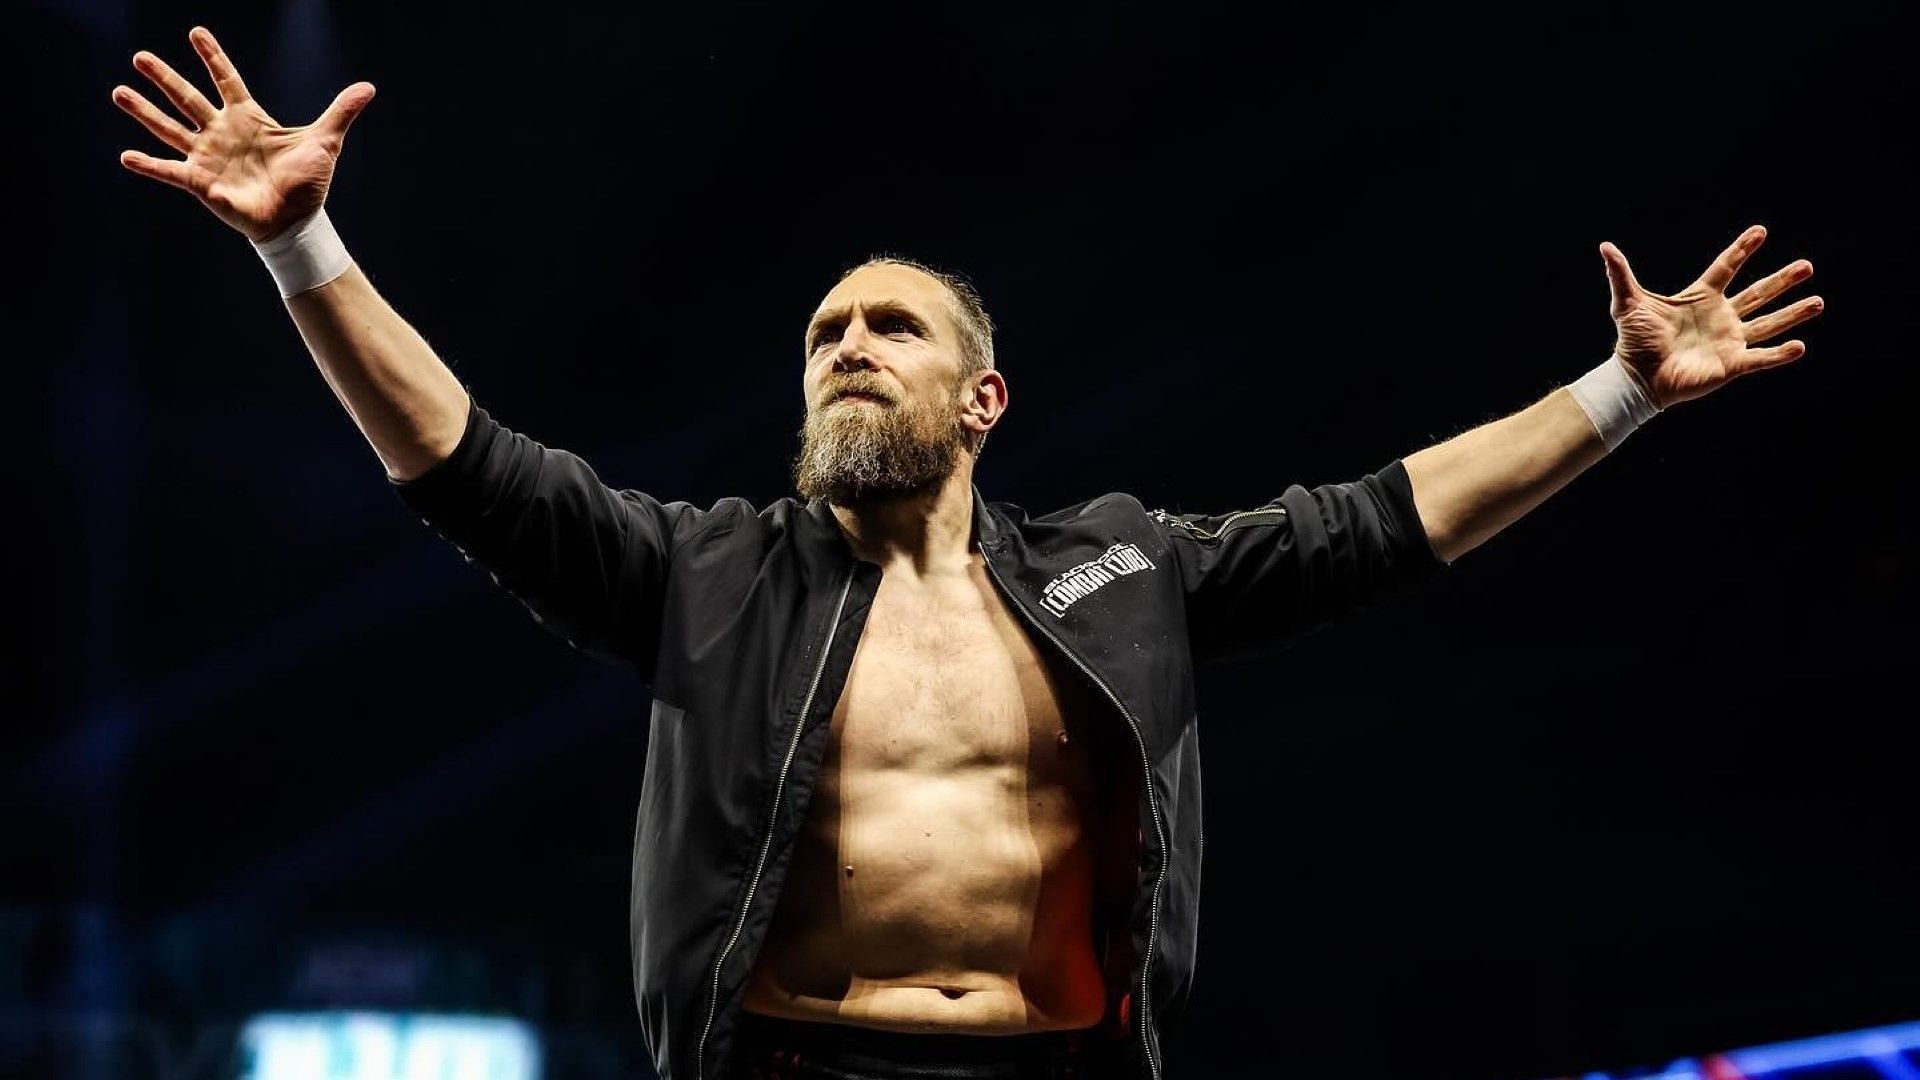 Bryan Danielson poses in the ring on AEW Dynamite